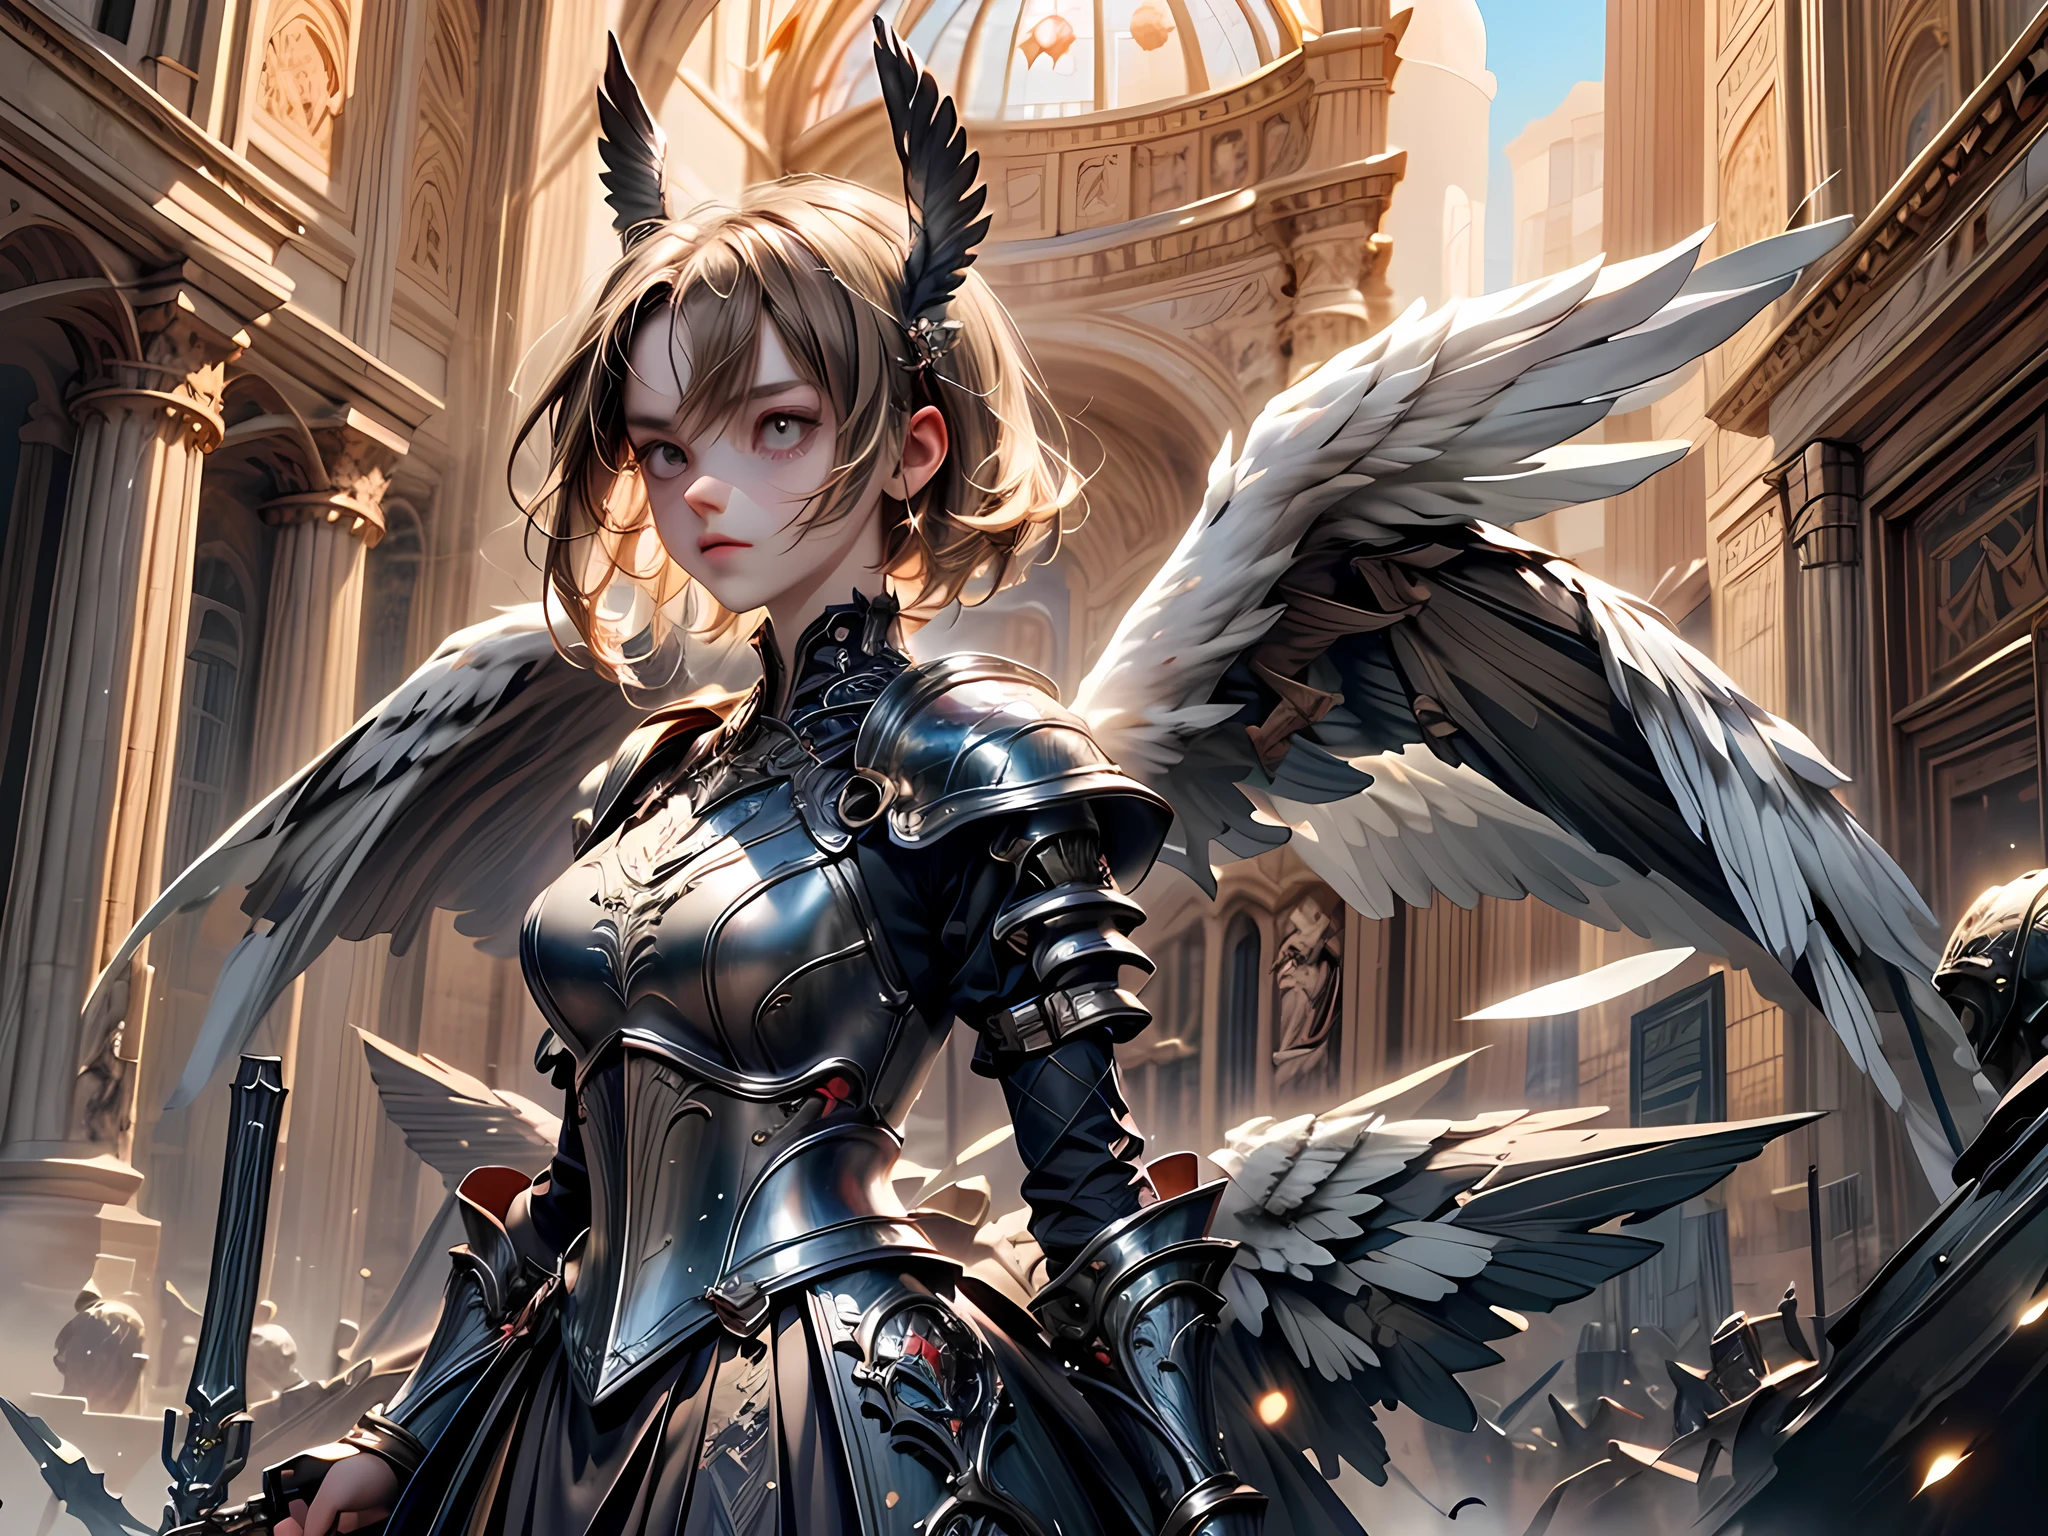 16K, ultra detailed, masterpiece, best quality, (extremely detailed), arafed, dnd art, portrait, full body, aasimar, female, (Masterpiece 1.3, intense details), female, paladin, holy warrior fighting undead (Masterpiece 1.3, intense details) large angelic wings, white angelic wings spread (Masterpiece 1.3, intense details), dark fantasy cemetery background, moon light, moon, stars, clouds, wearing (white: 1.1)  armor (Masterpiece 1.3, intense details), holy symbol, armed with sword, short blond hair,  detailed face, (Masterpiece 1.5, best quality), anatomically correct (Masterpiece 1.3, intense details), angel_wings, determined face, god rays, cinematic lighting, glowing light, silhouette, from outside, photorealism, panoramic view  (Masterpiece 1.3, intense details) , Wide-Angle, Ultra-Wide Angle, 8k, highres, best quality, high details, armored dress, landing_wings